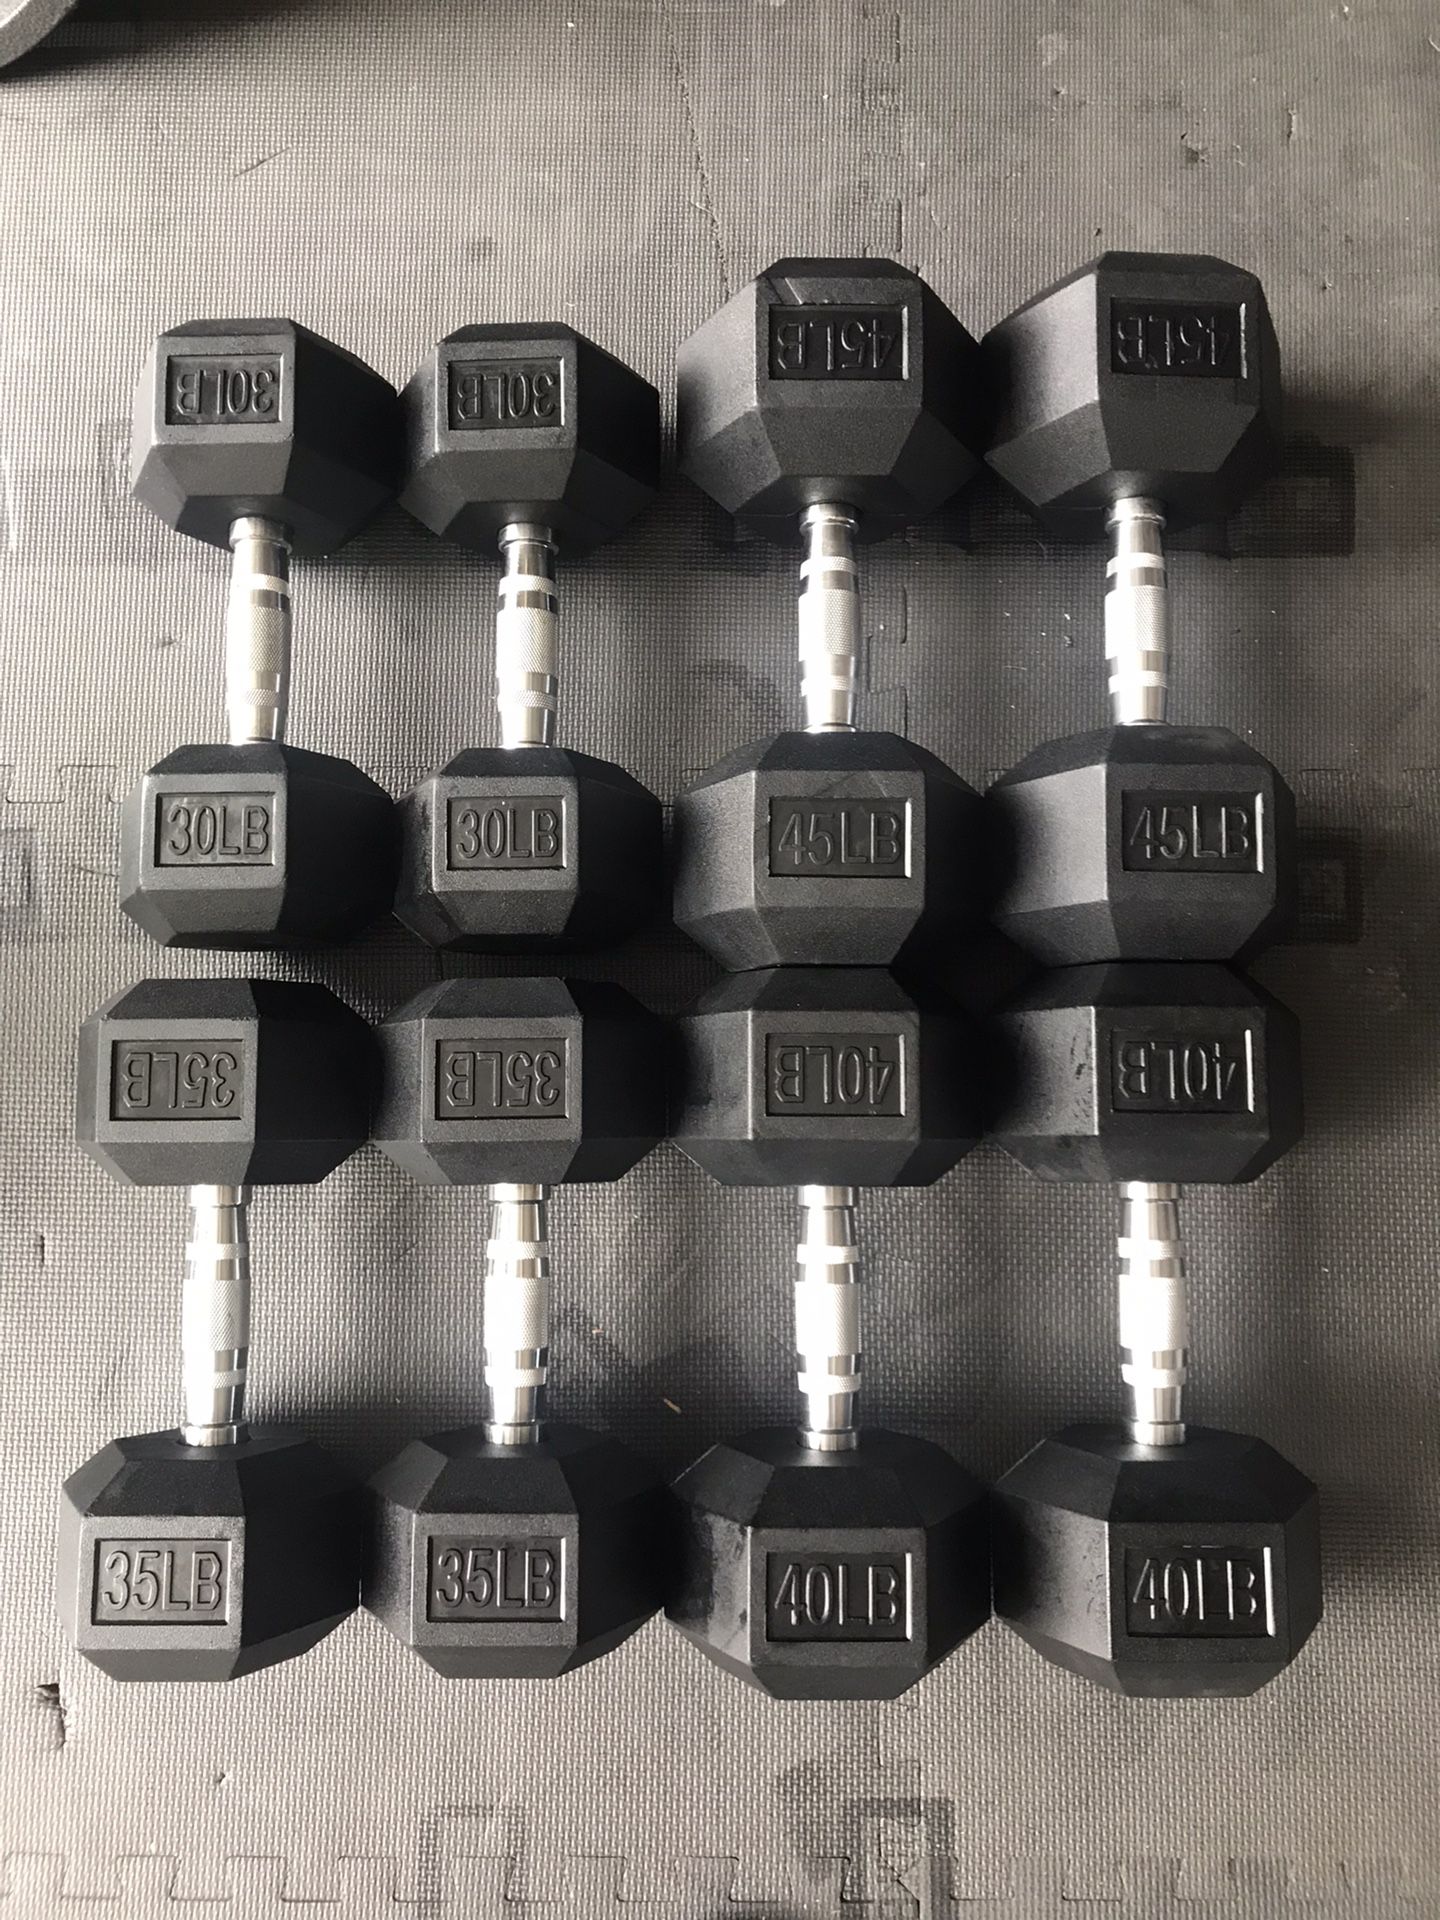 New Rubber Coated Hex Dumbbells 💪 (2x30Lbs, 2x35Lbs, 2x40Lbs, 2x45Lbs) for $225 Firm